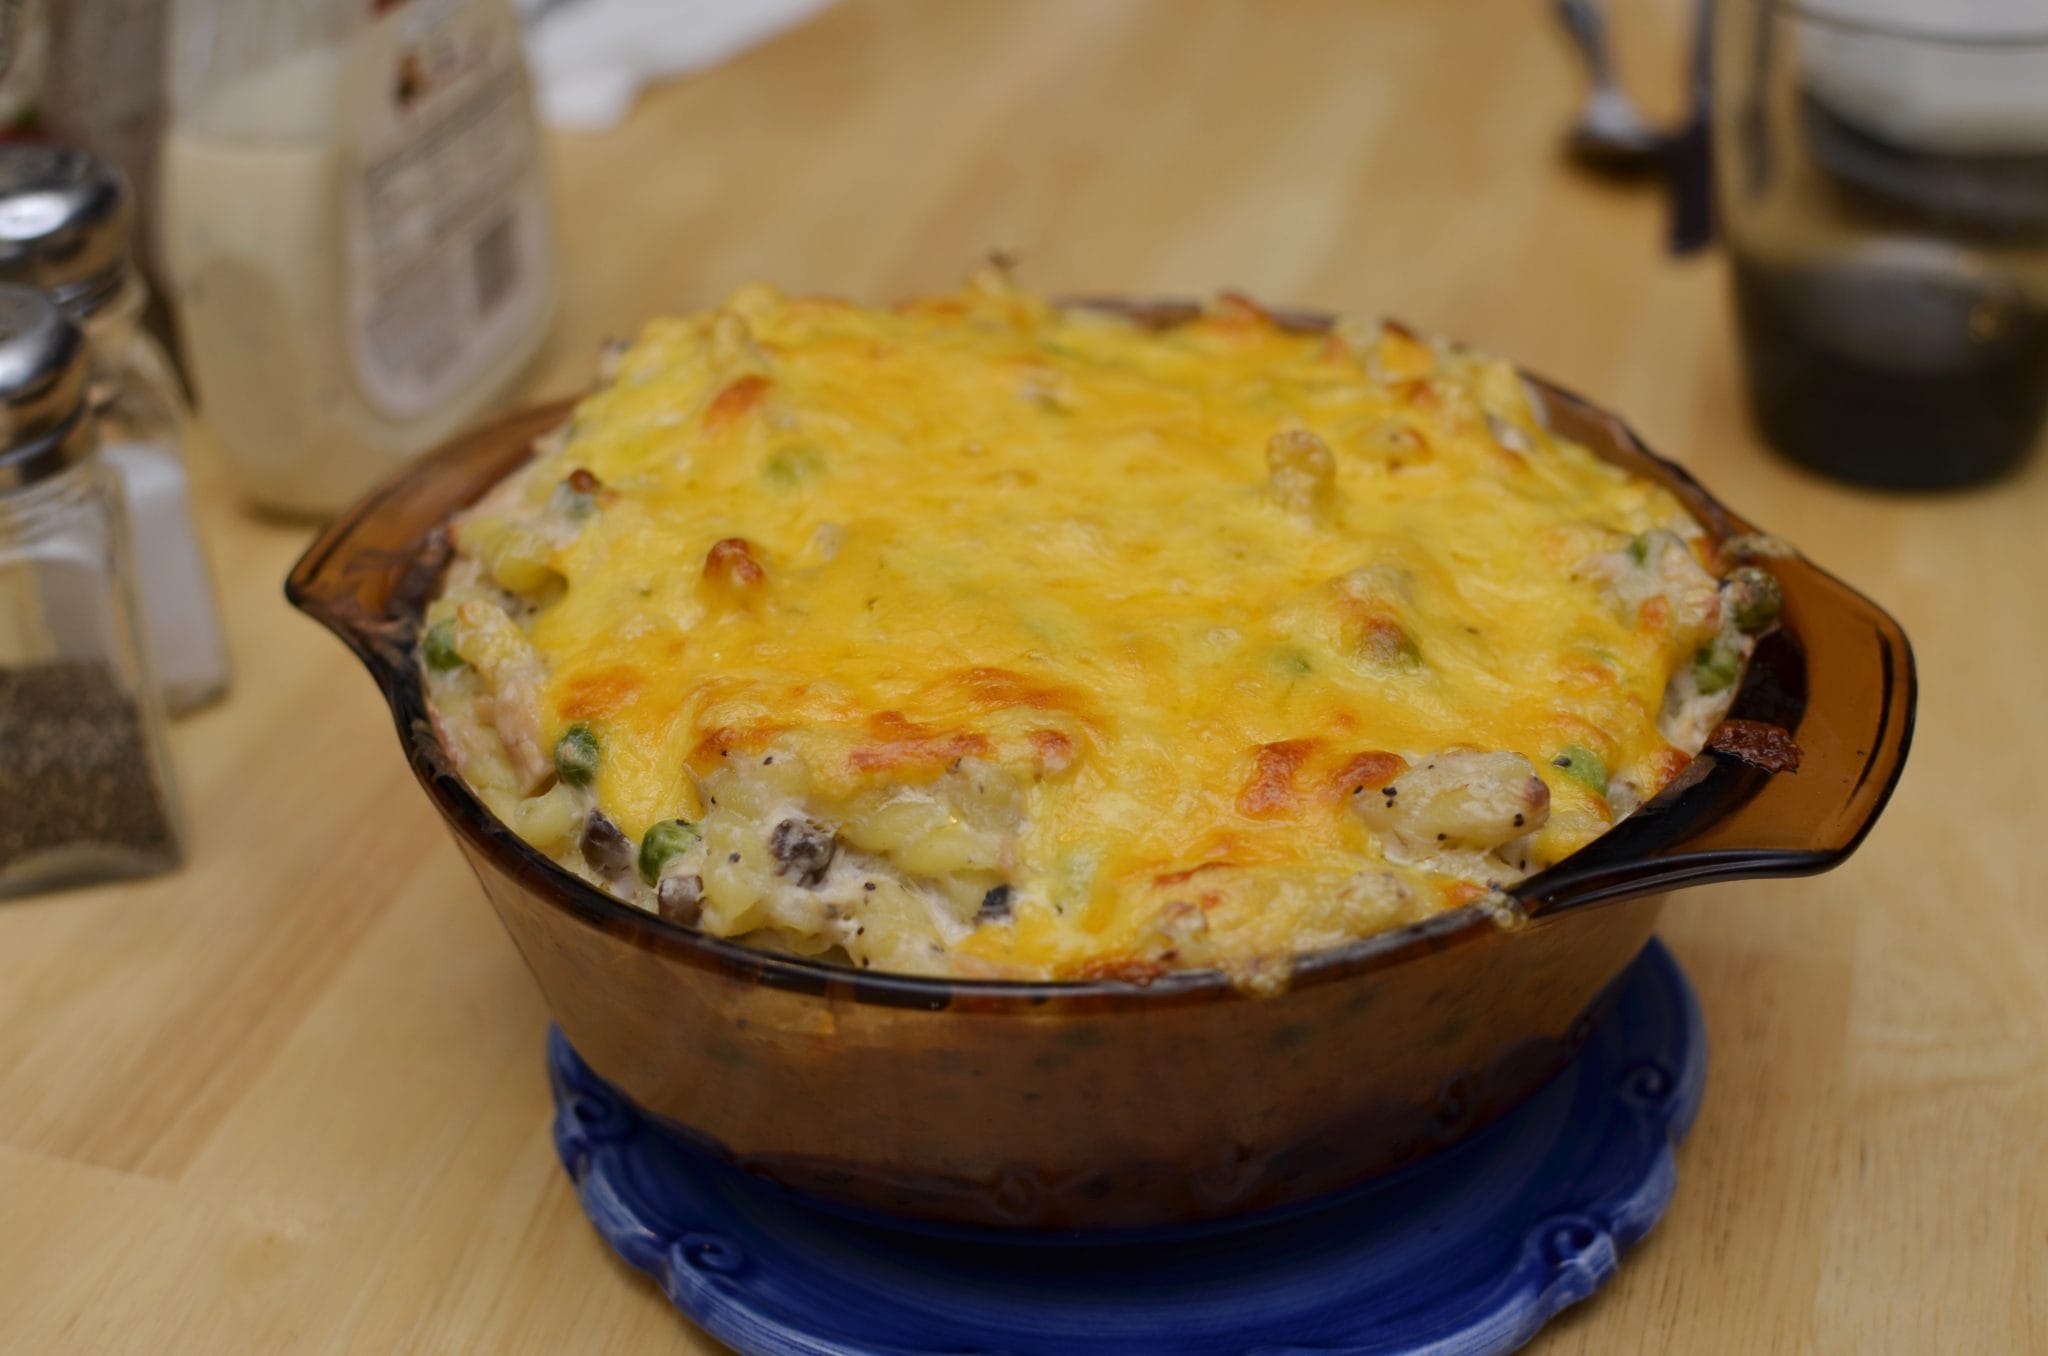 A bowl of tuna casserole cooked with melted cheese on top.